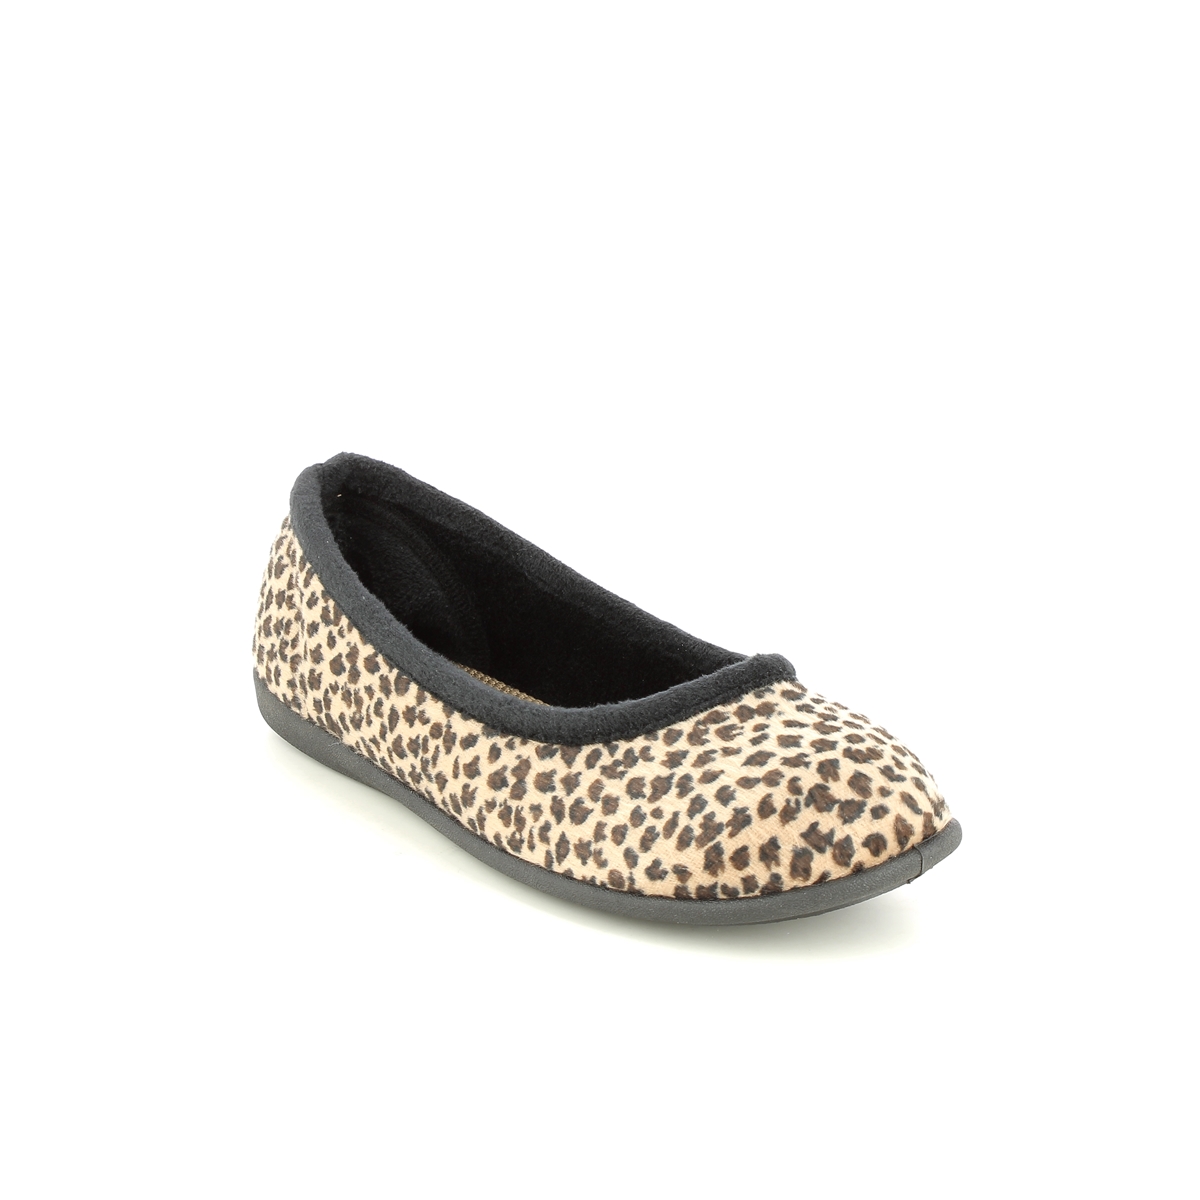 Padders Ballerina E Fit Leopard print Womens slippers 4025-2500 in a Plain Textile in Size 4